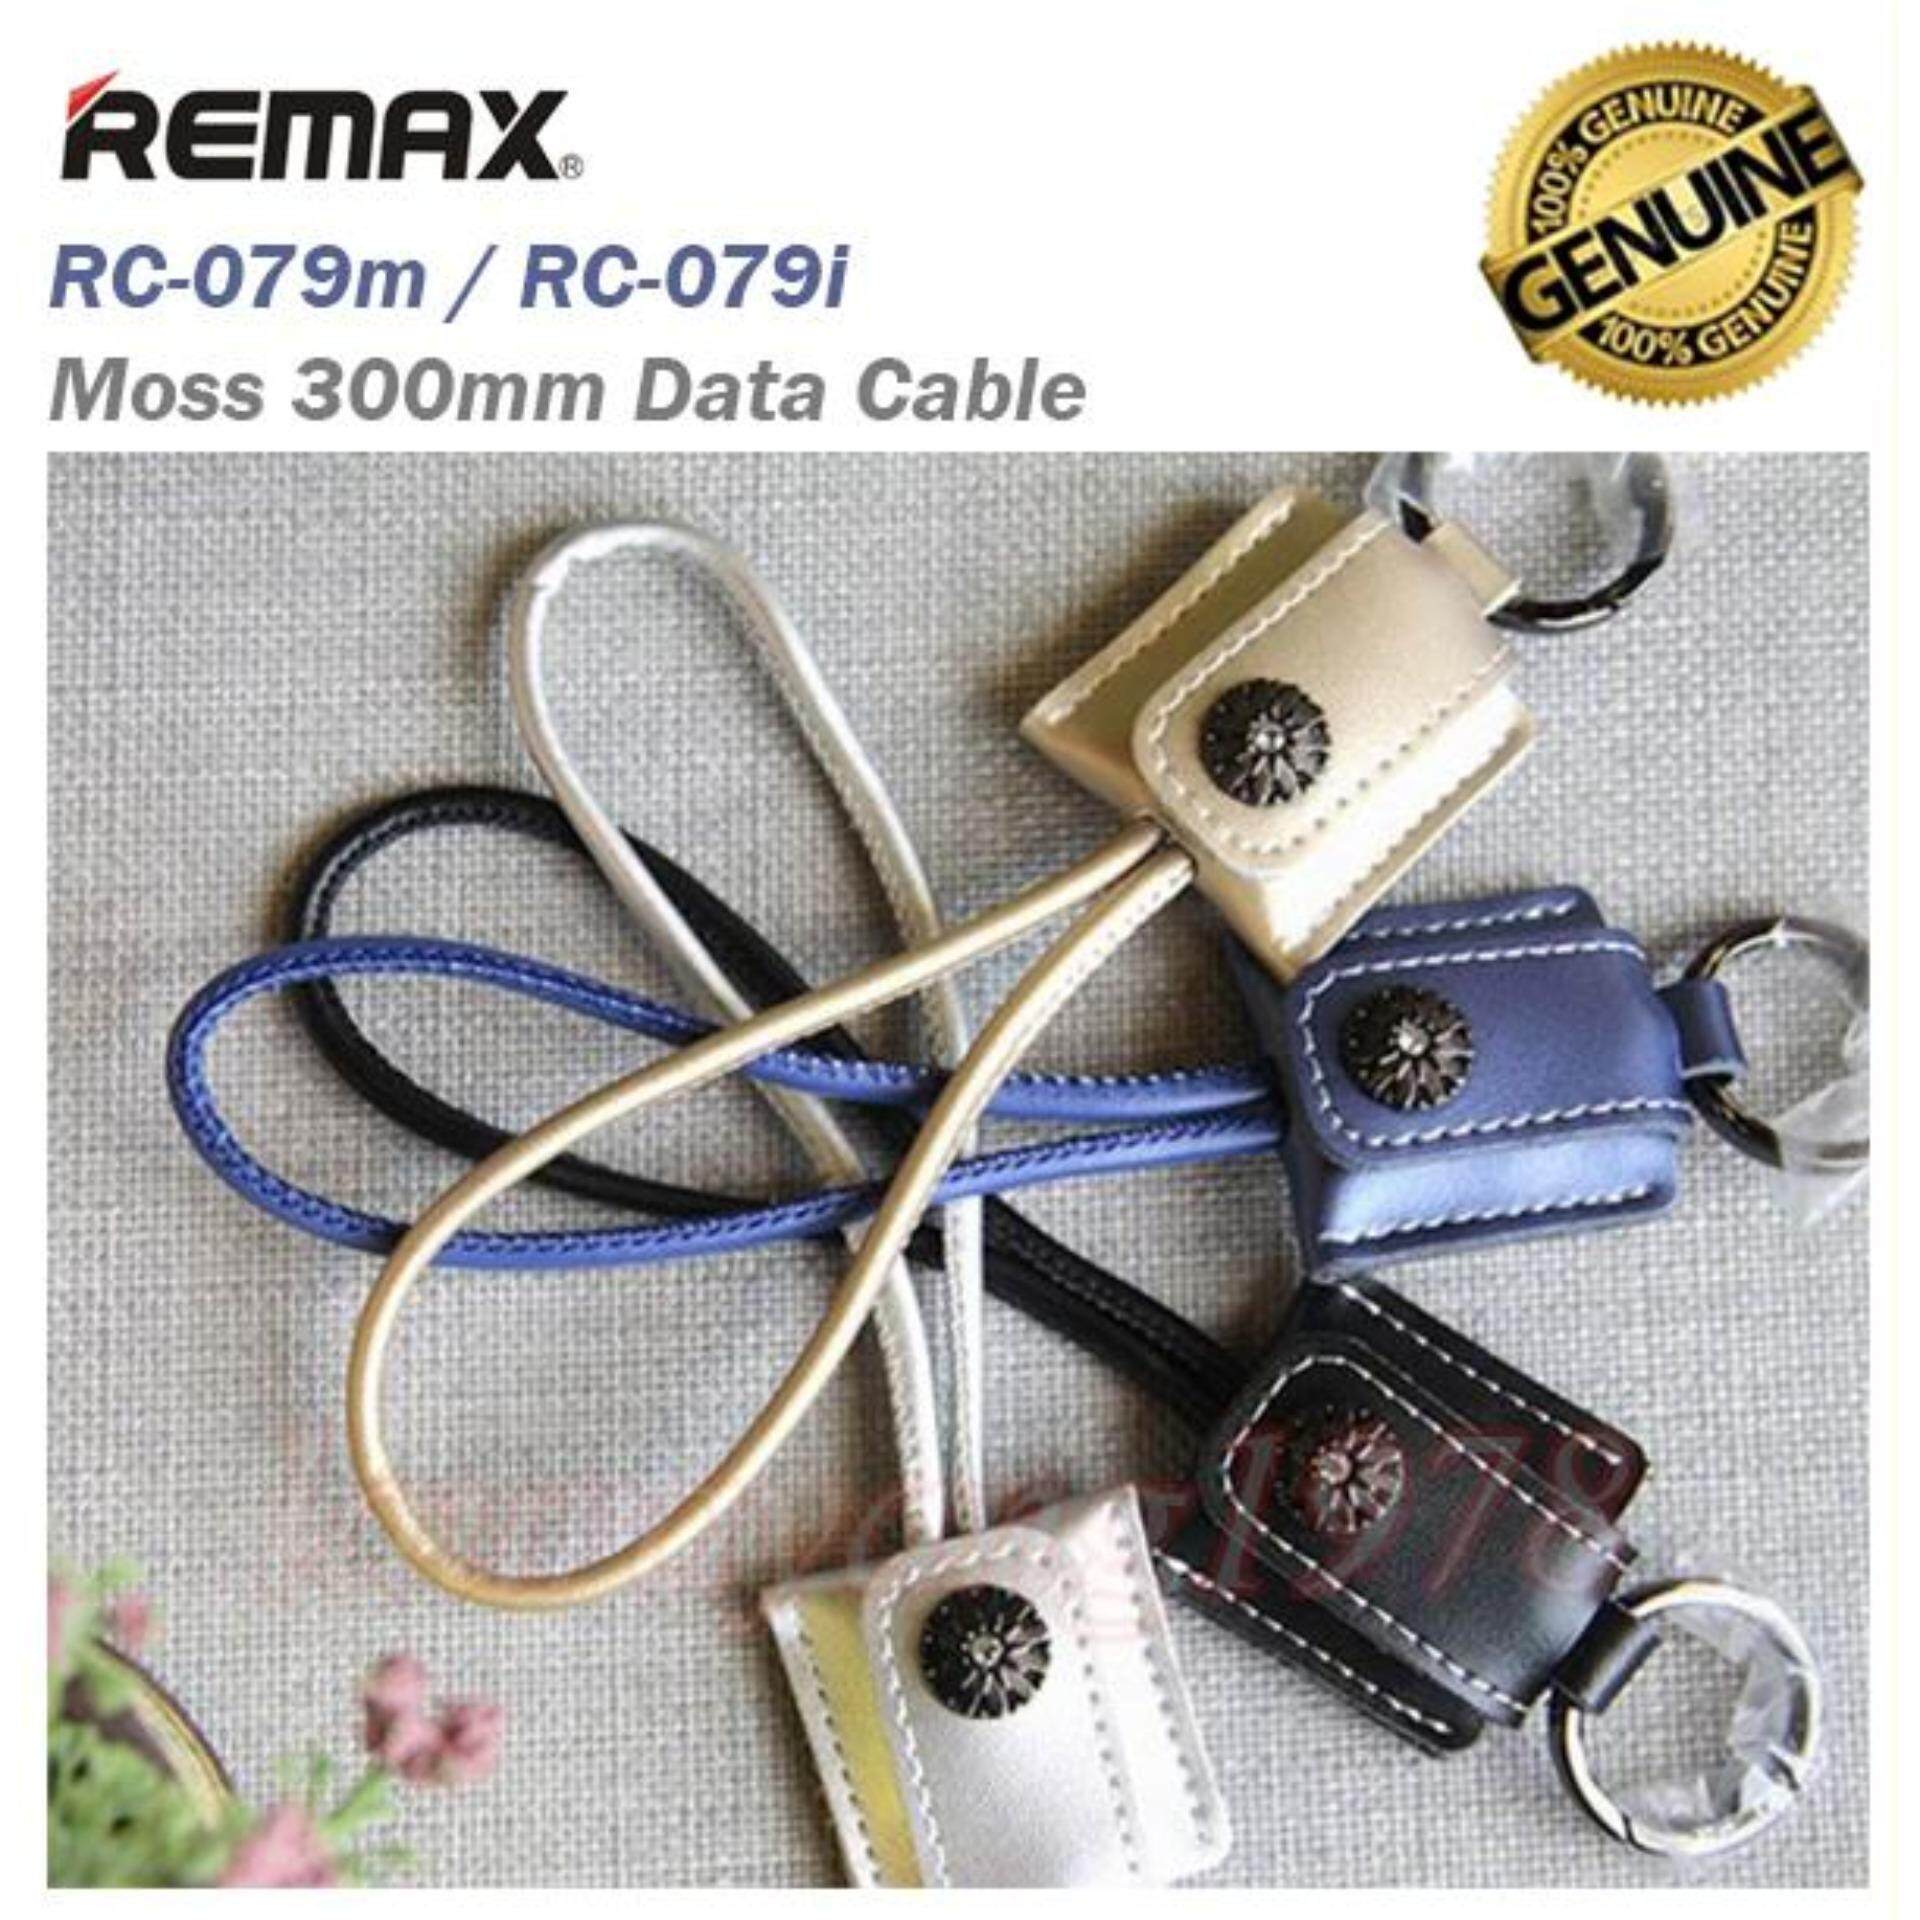 [IX] Remax RC-079m MOSS Data Cable for Micro USB